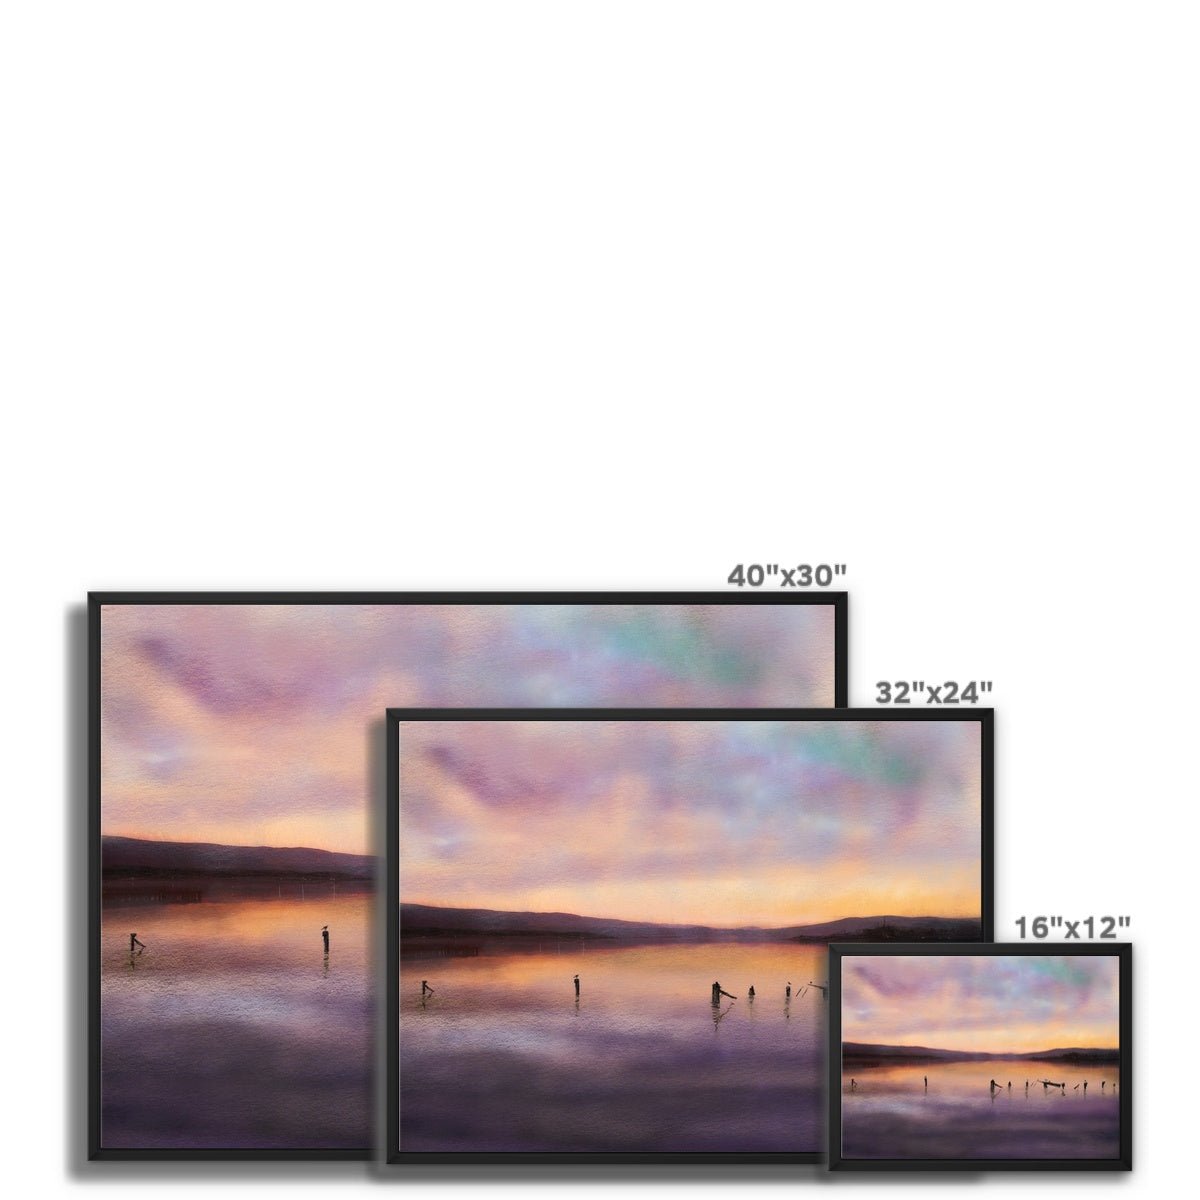 Admiralty Jetty Dusk Painting | Framed Canvas From Scotland-Floating Framed Canvas Prints-River Clyde Art Gallery-Paintings, Prints, Homeware, Art Gifts From Scotland By Scottish Artist Kevin Hunter